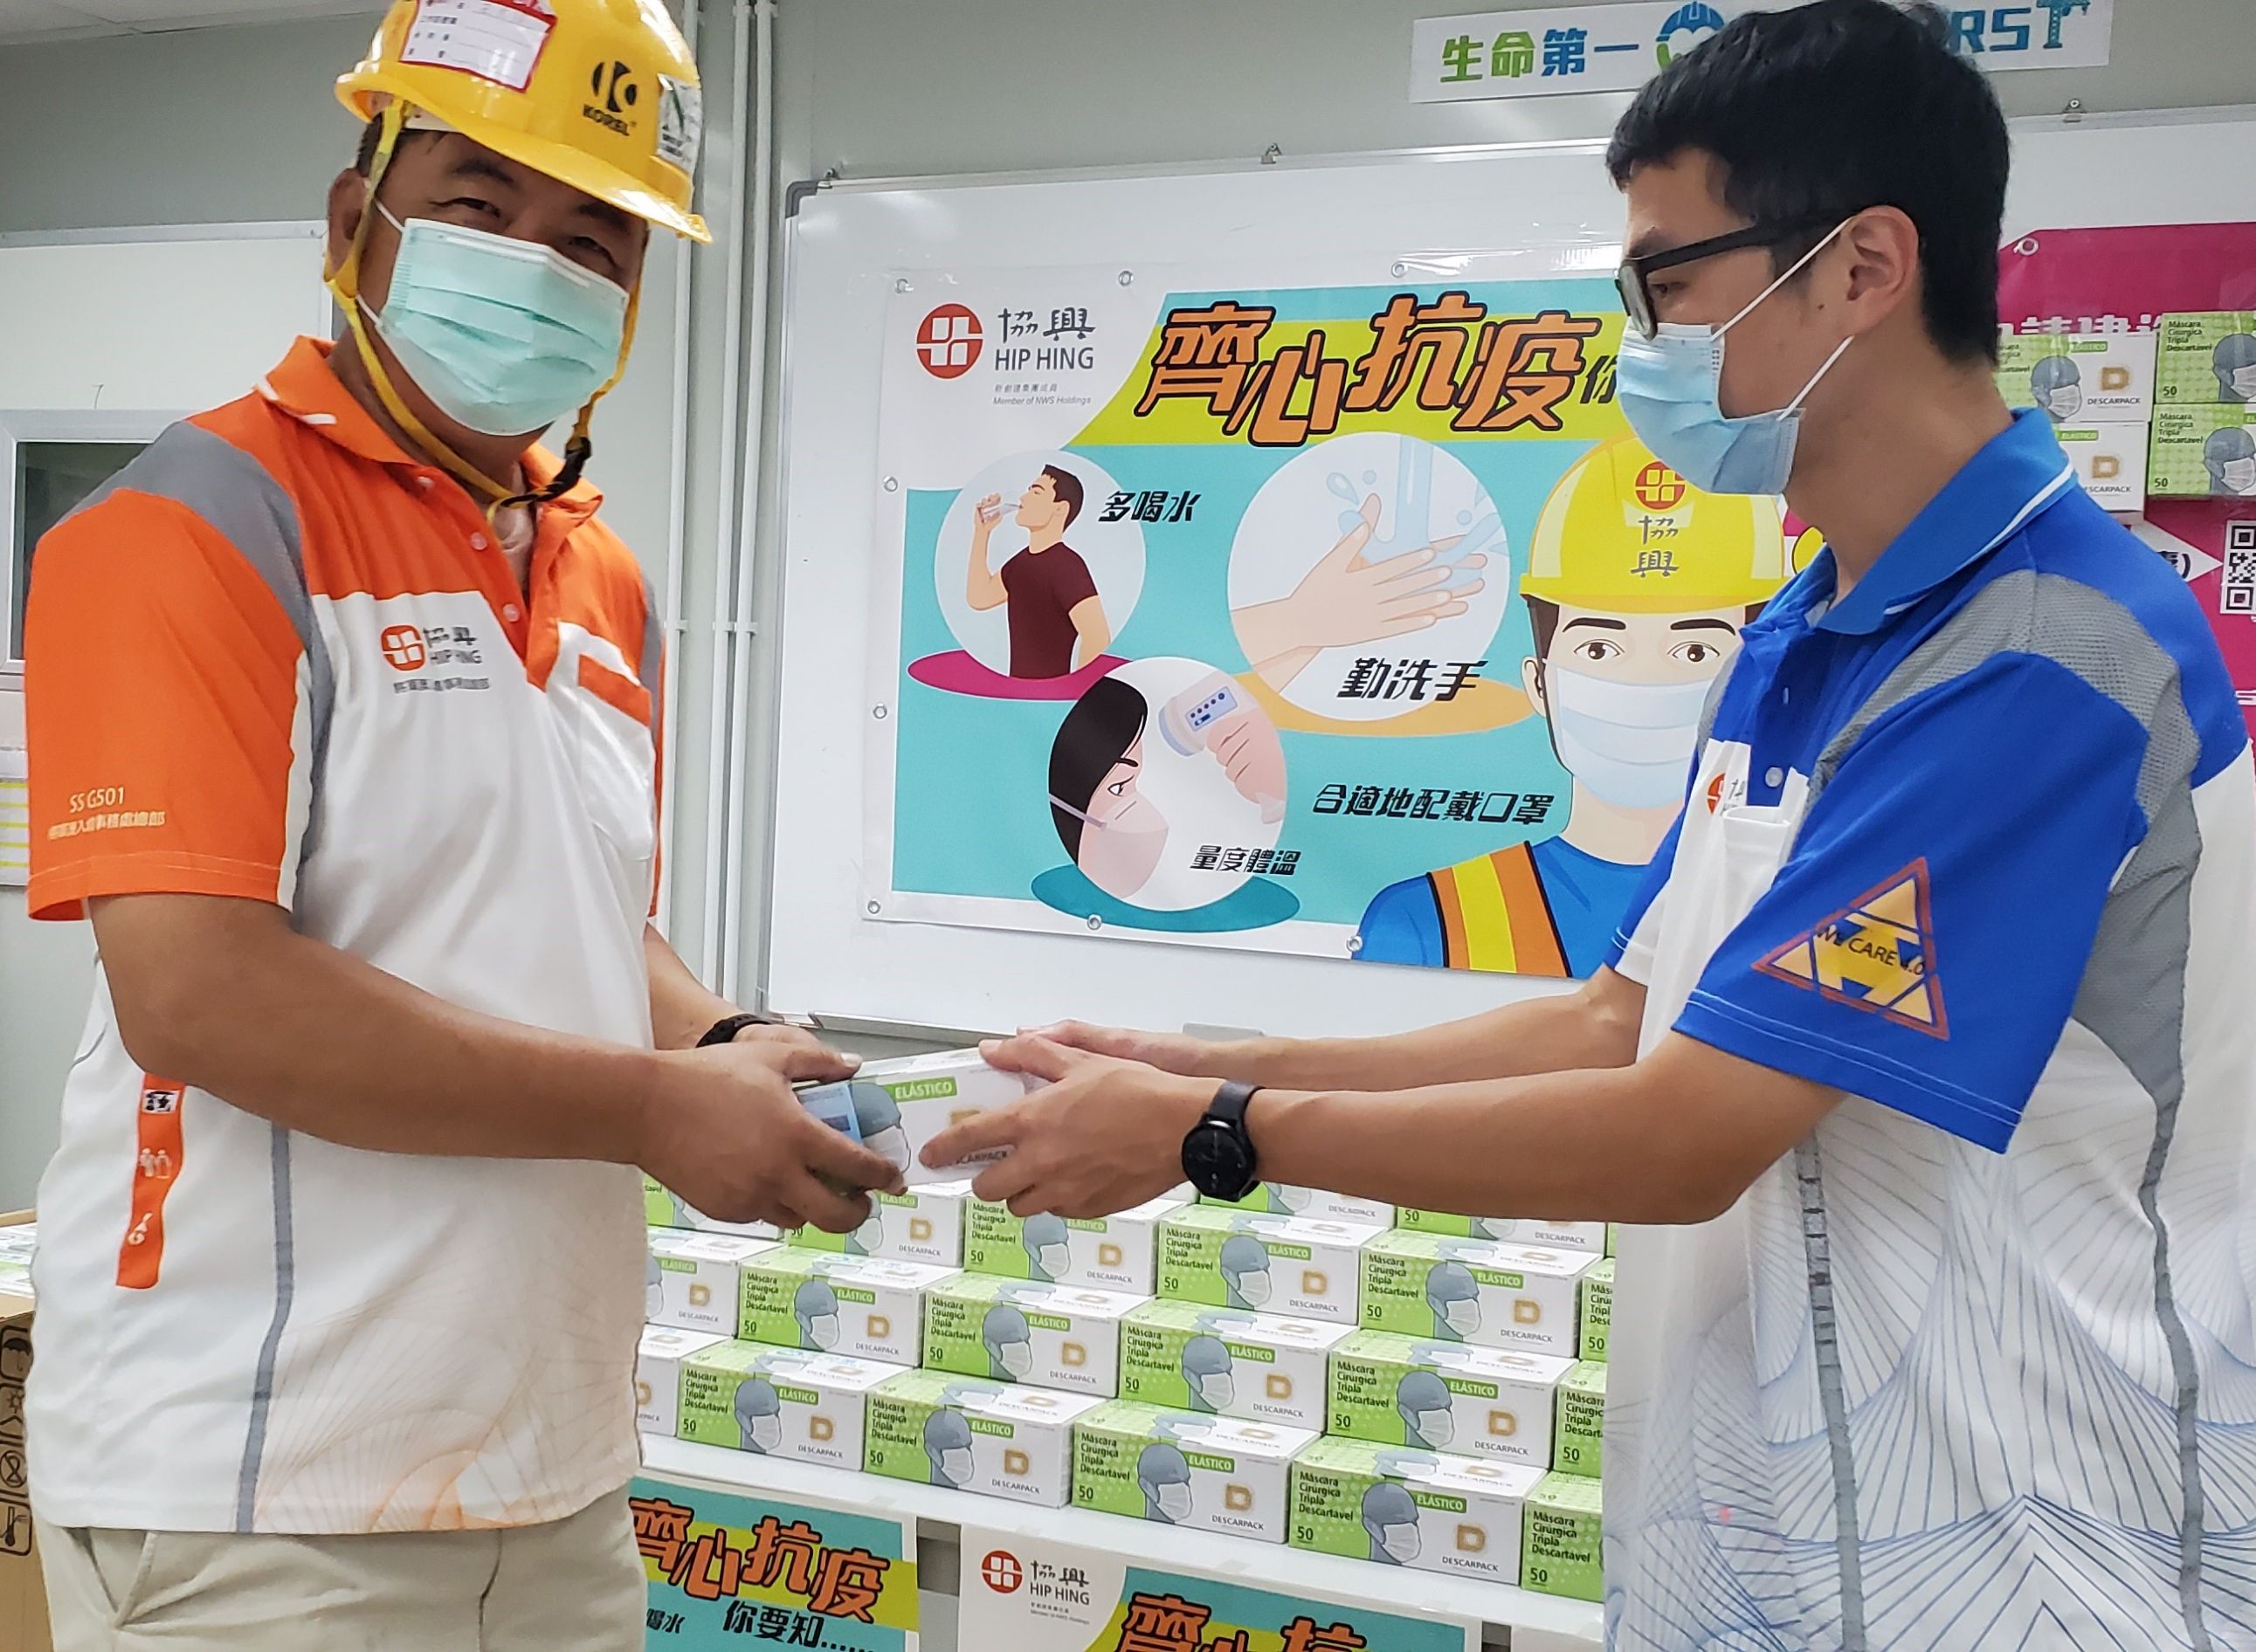 Masks distribution to fight the pandemic